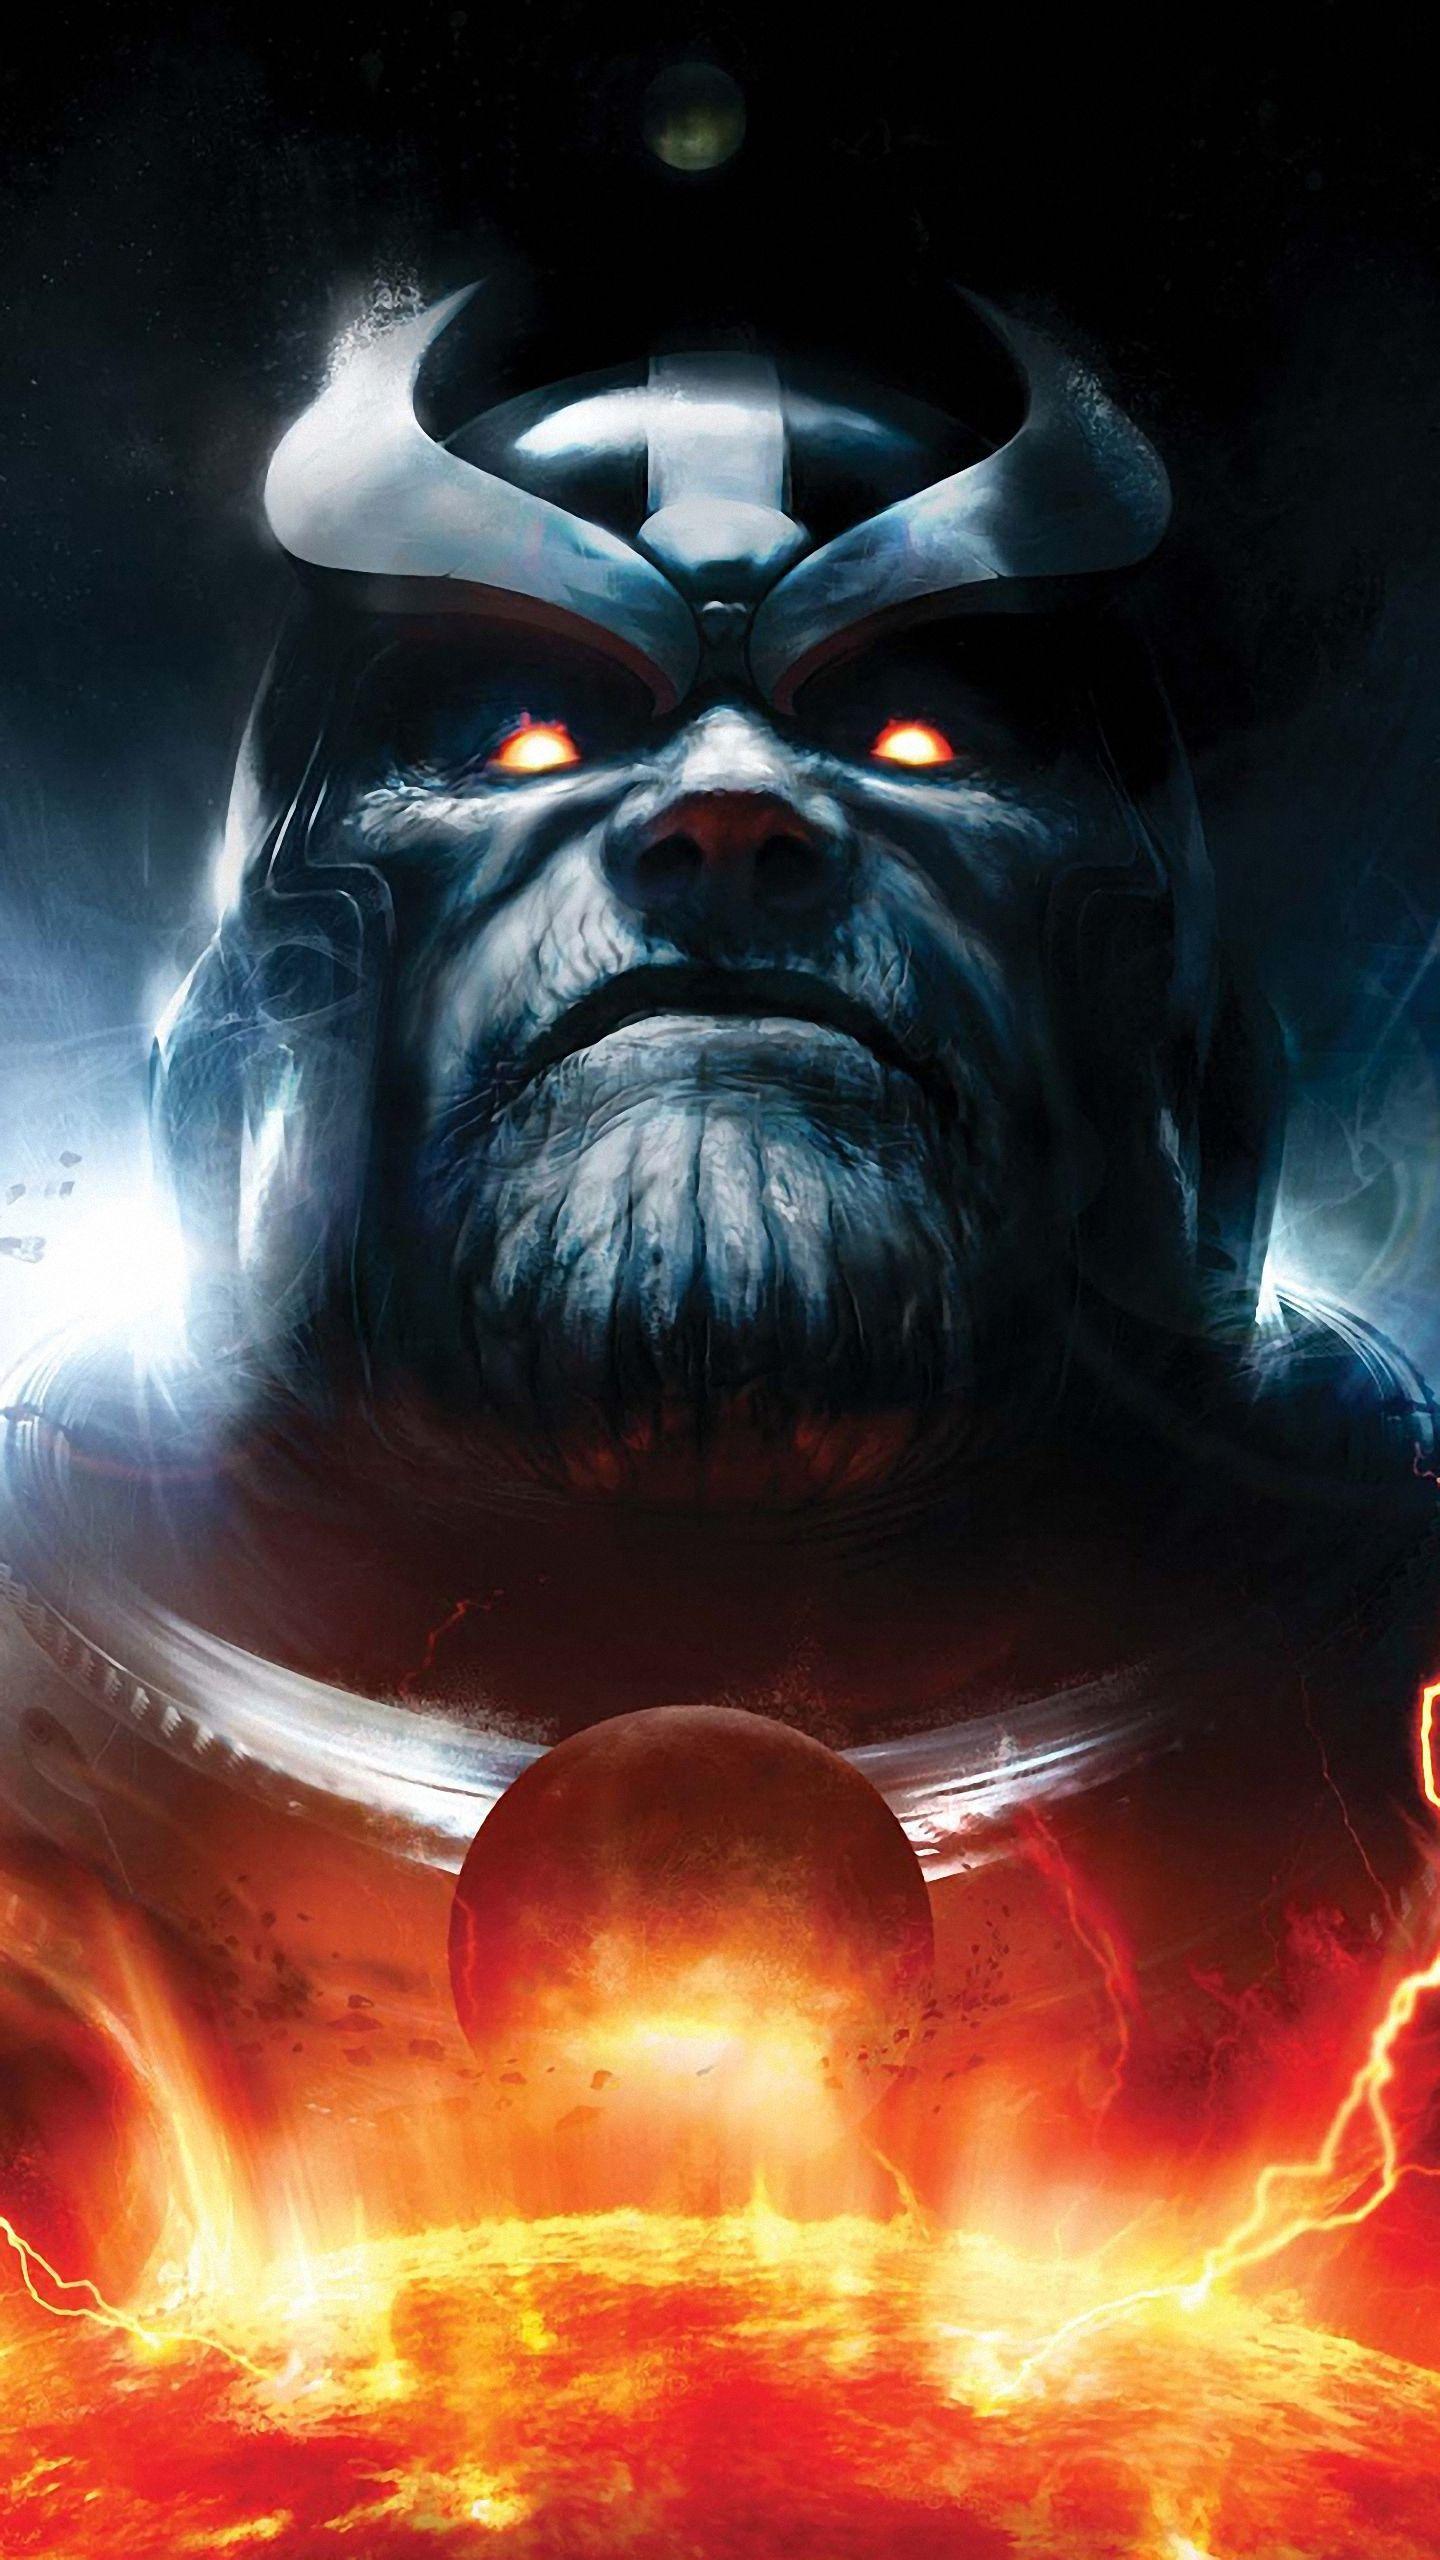 The Thanos Imperative samsung galaxy note 4 Wallpaper HD 1440x2560